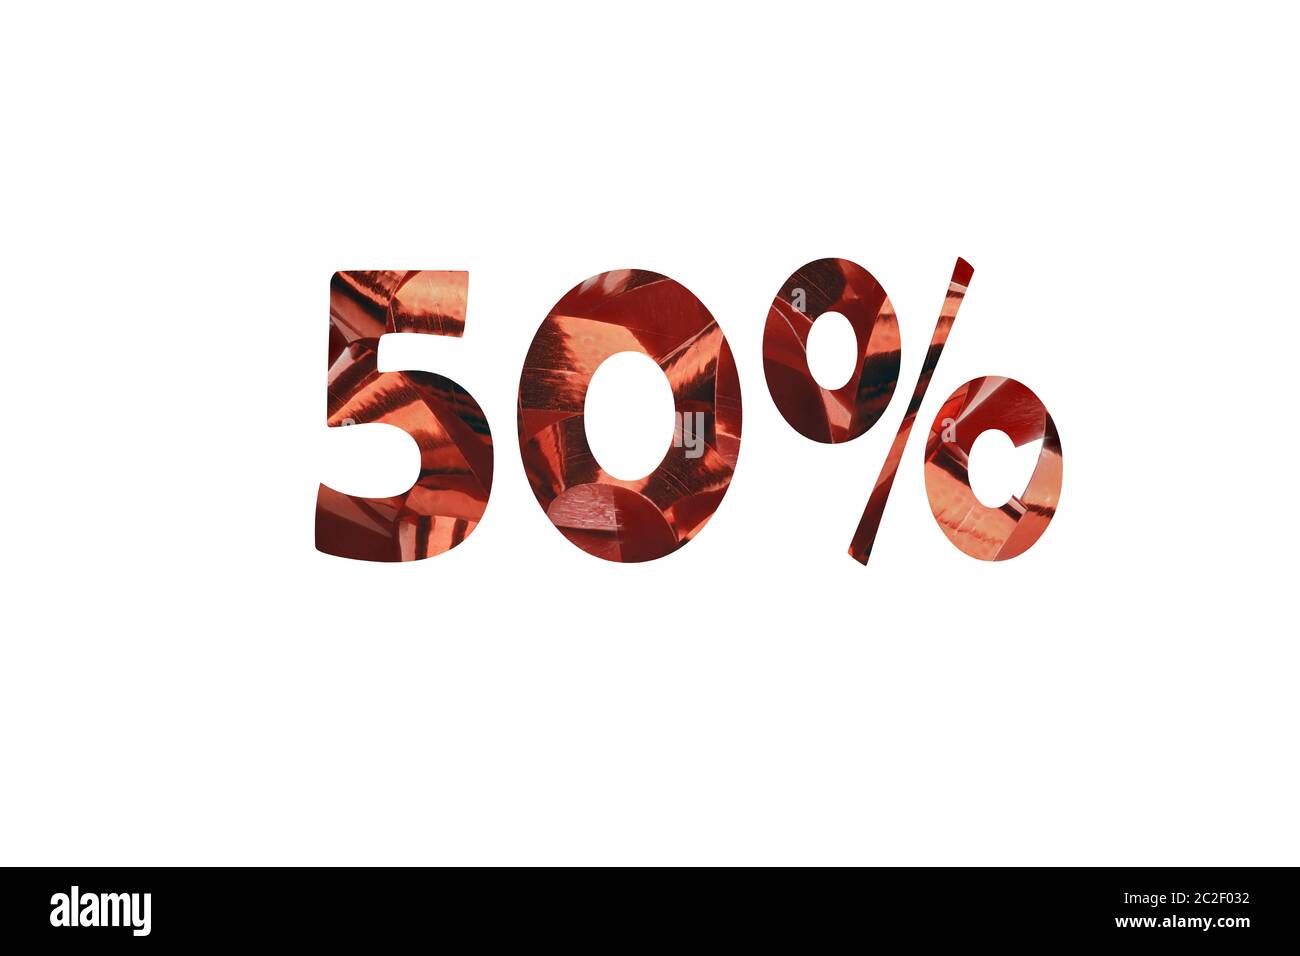 Symbolic representation of 50 percent discount with a cut out number 50 and the percent sign Stock Photo